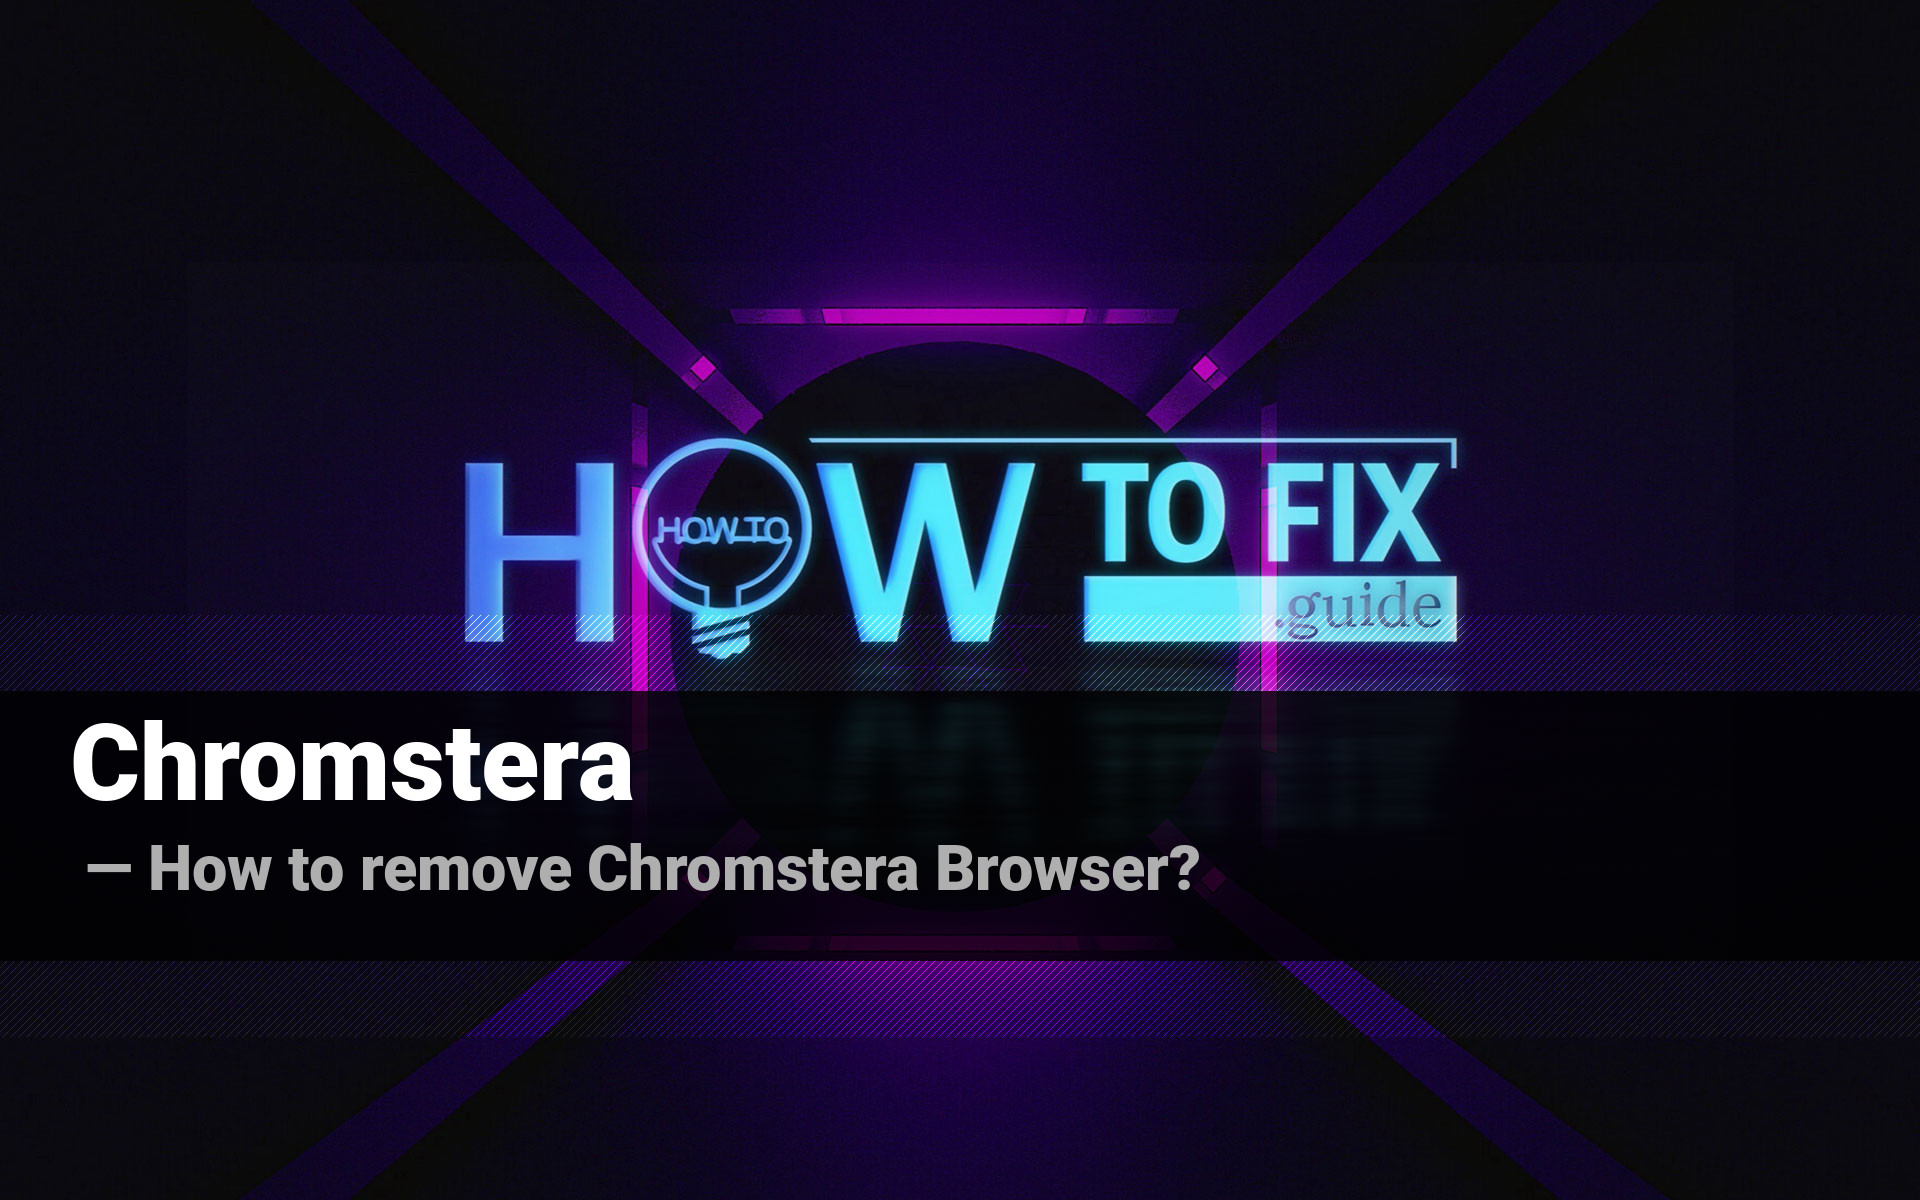 How to Remove the Chromstera Browser?